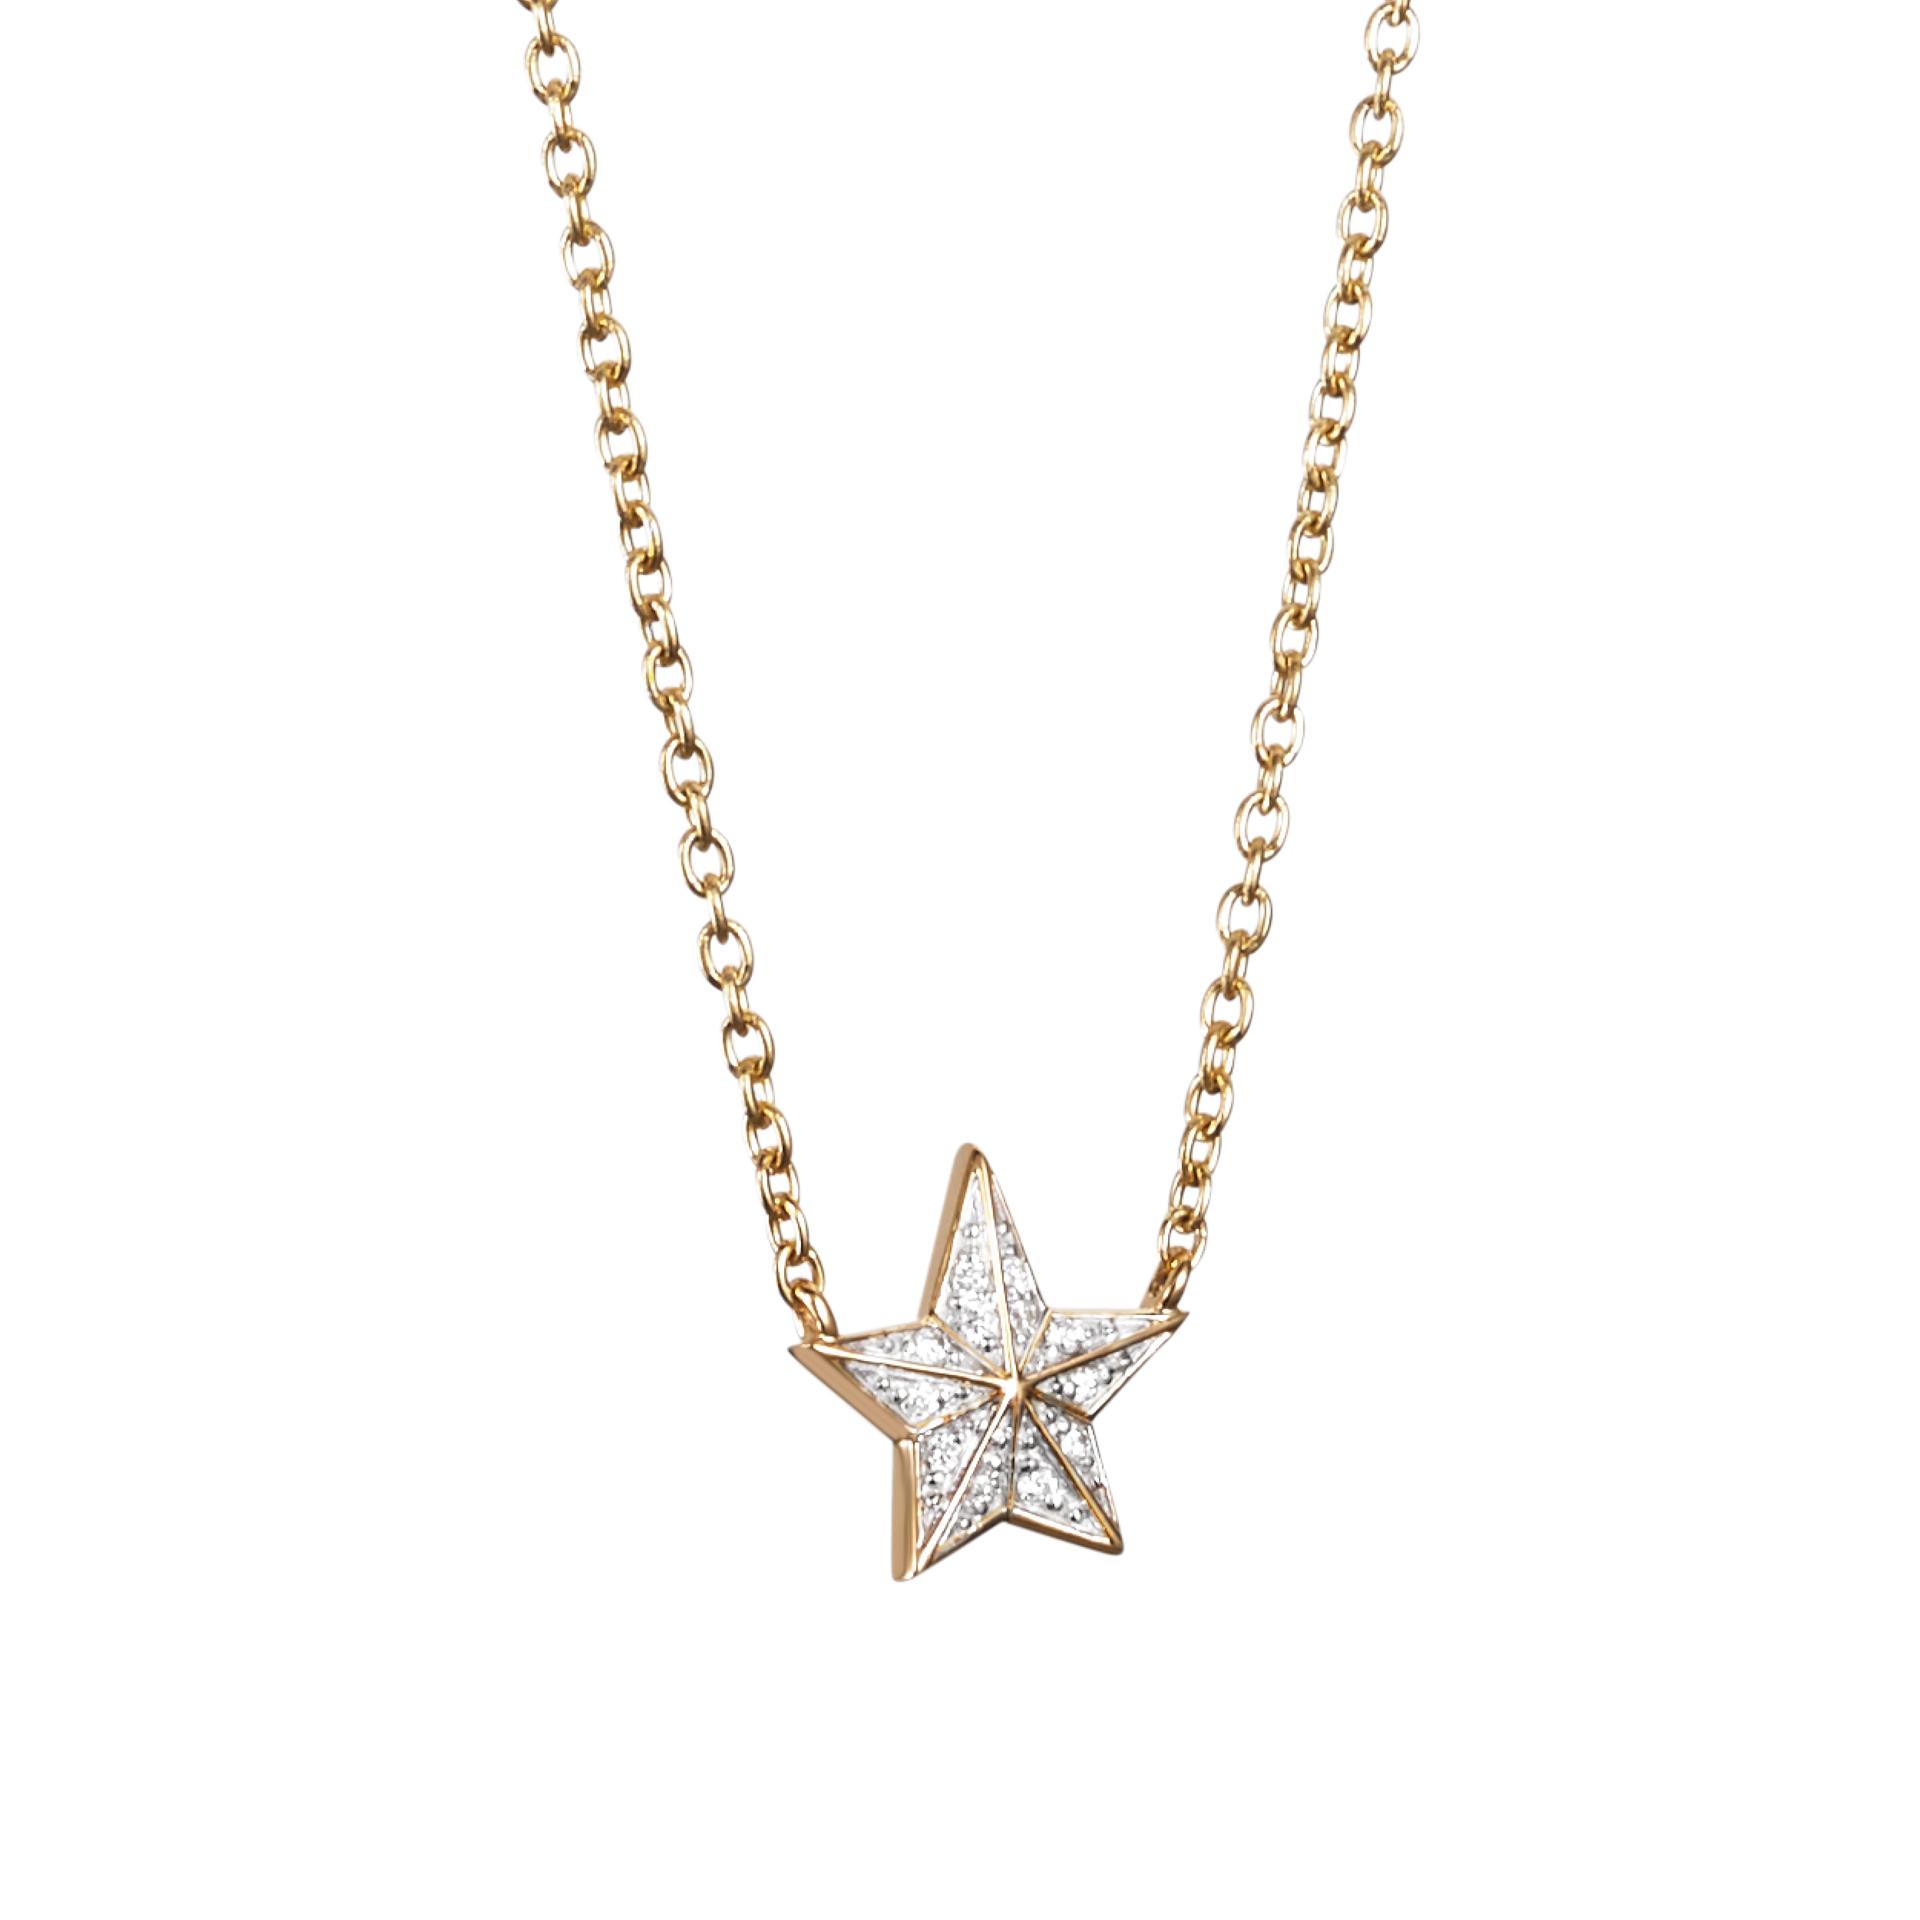 CATCH A FALLING STAR & STARS NECKLACE